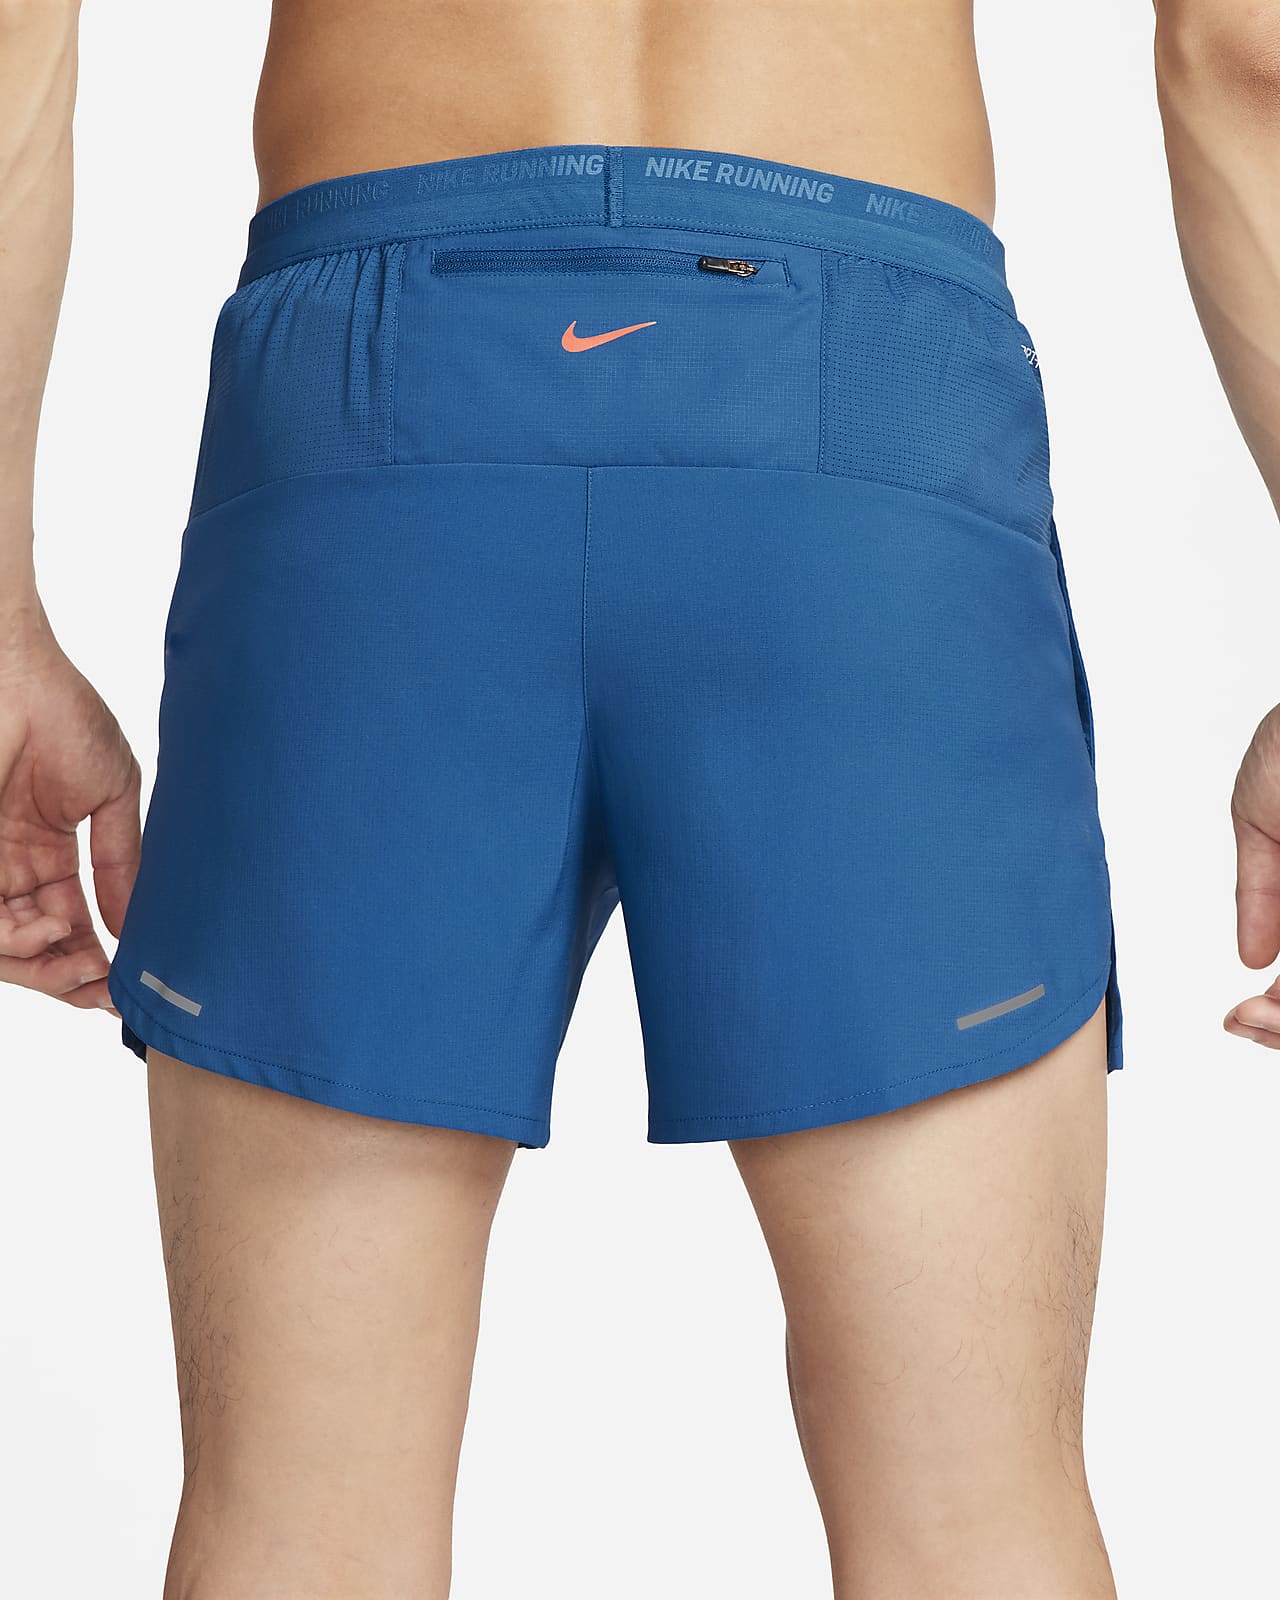 Nike Running Energy Stride Men's 13cm (approx.) Brief-Lined Running Shorts